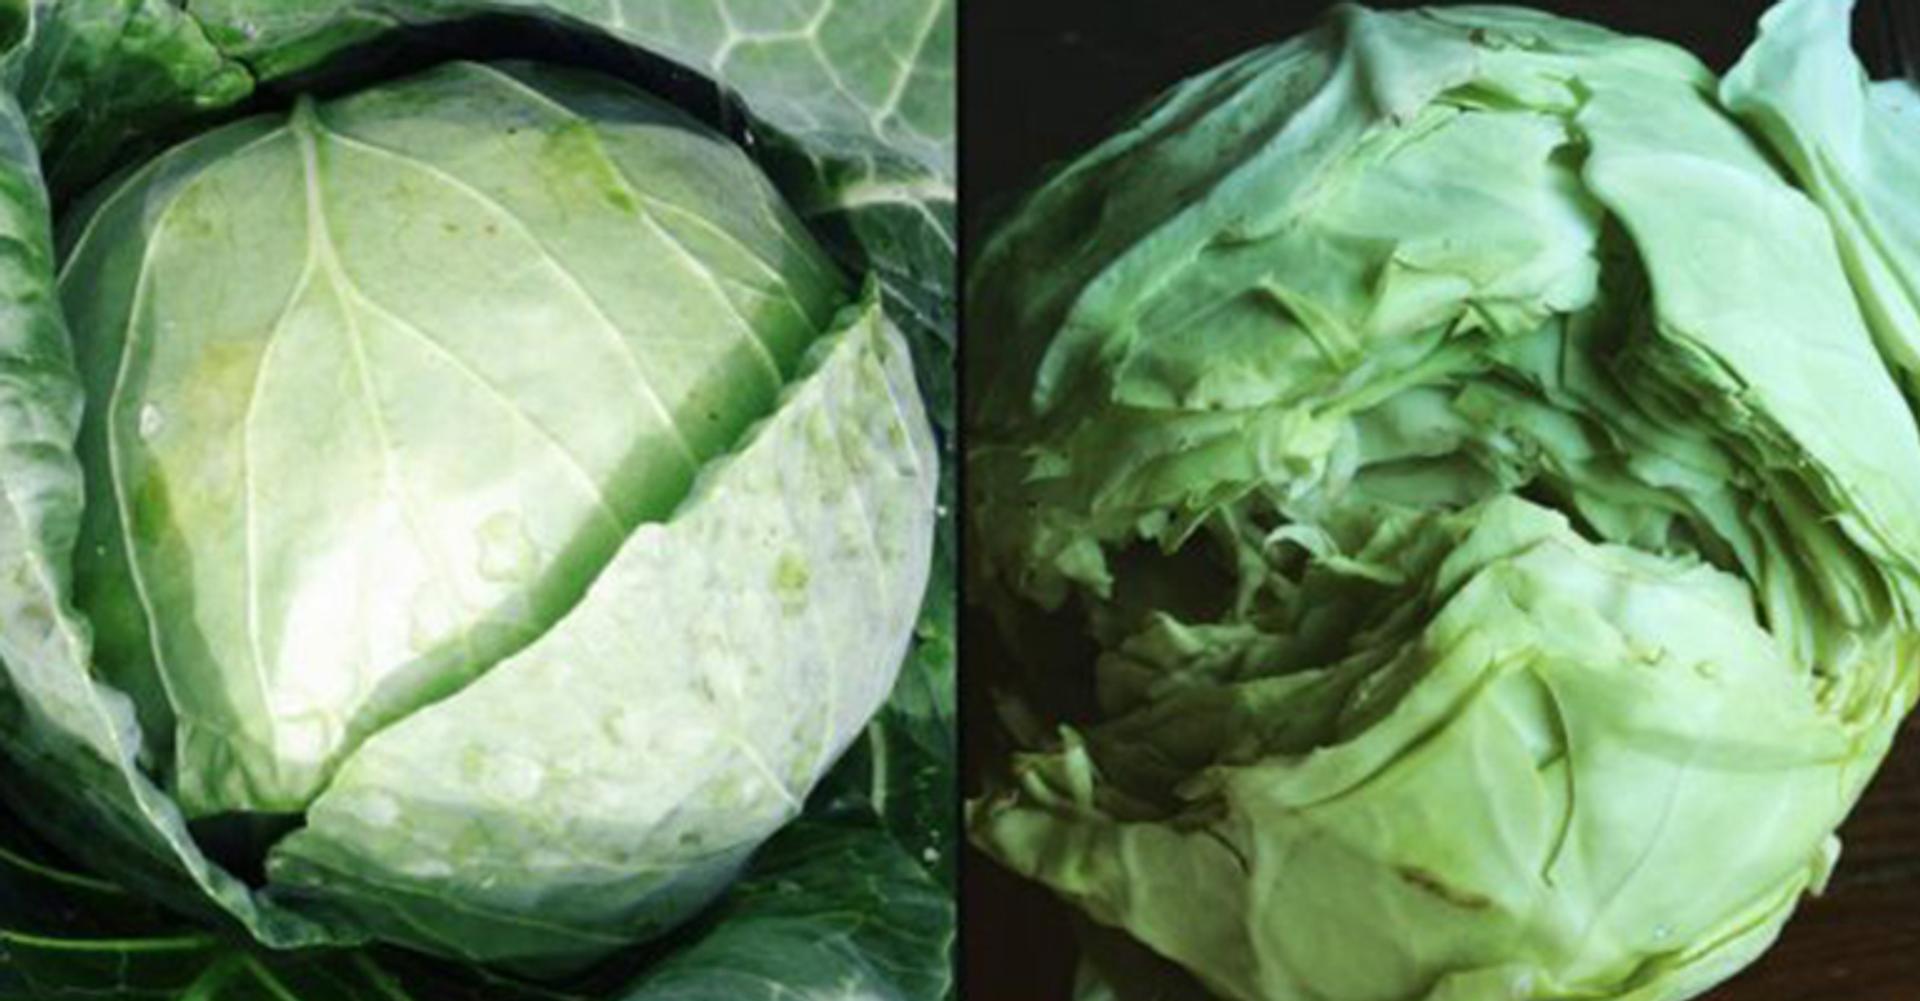 A side by side image of a perfect cabbage next to a cabbage with a split down the middle.